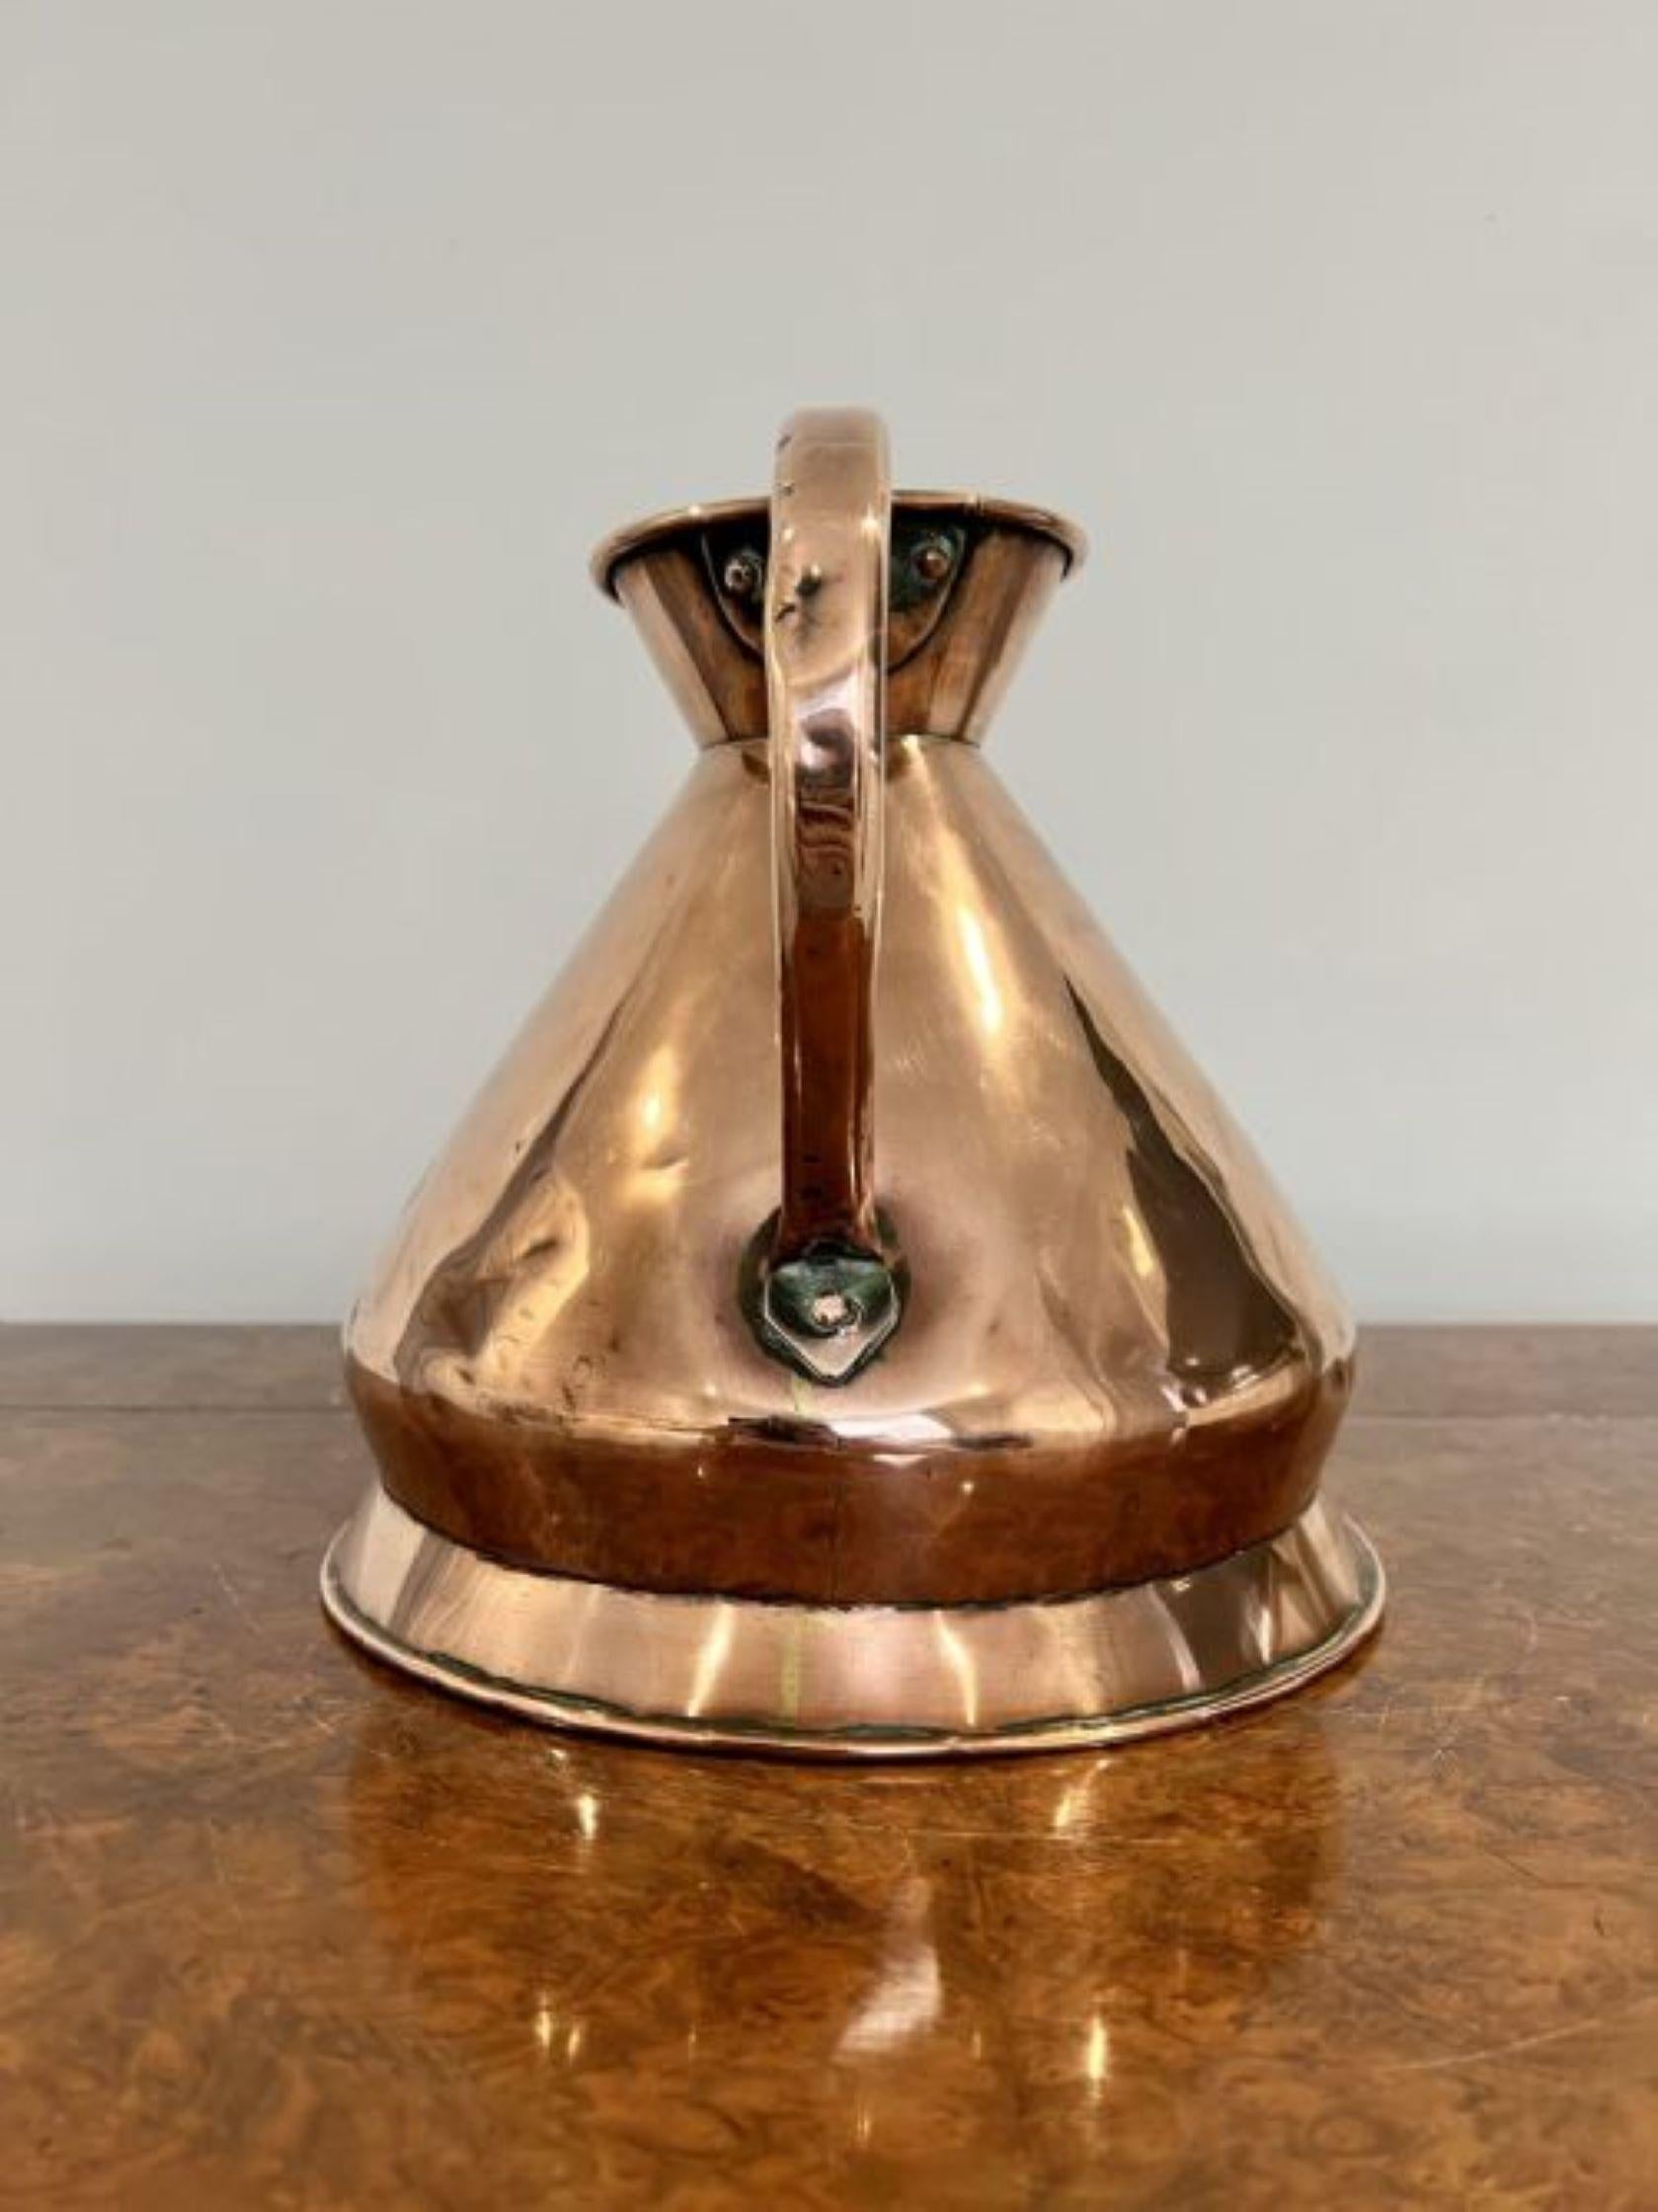 Quality George III Loftus of Oxford Street London copper one gallon jug having a shaped handle standing on a circular base